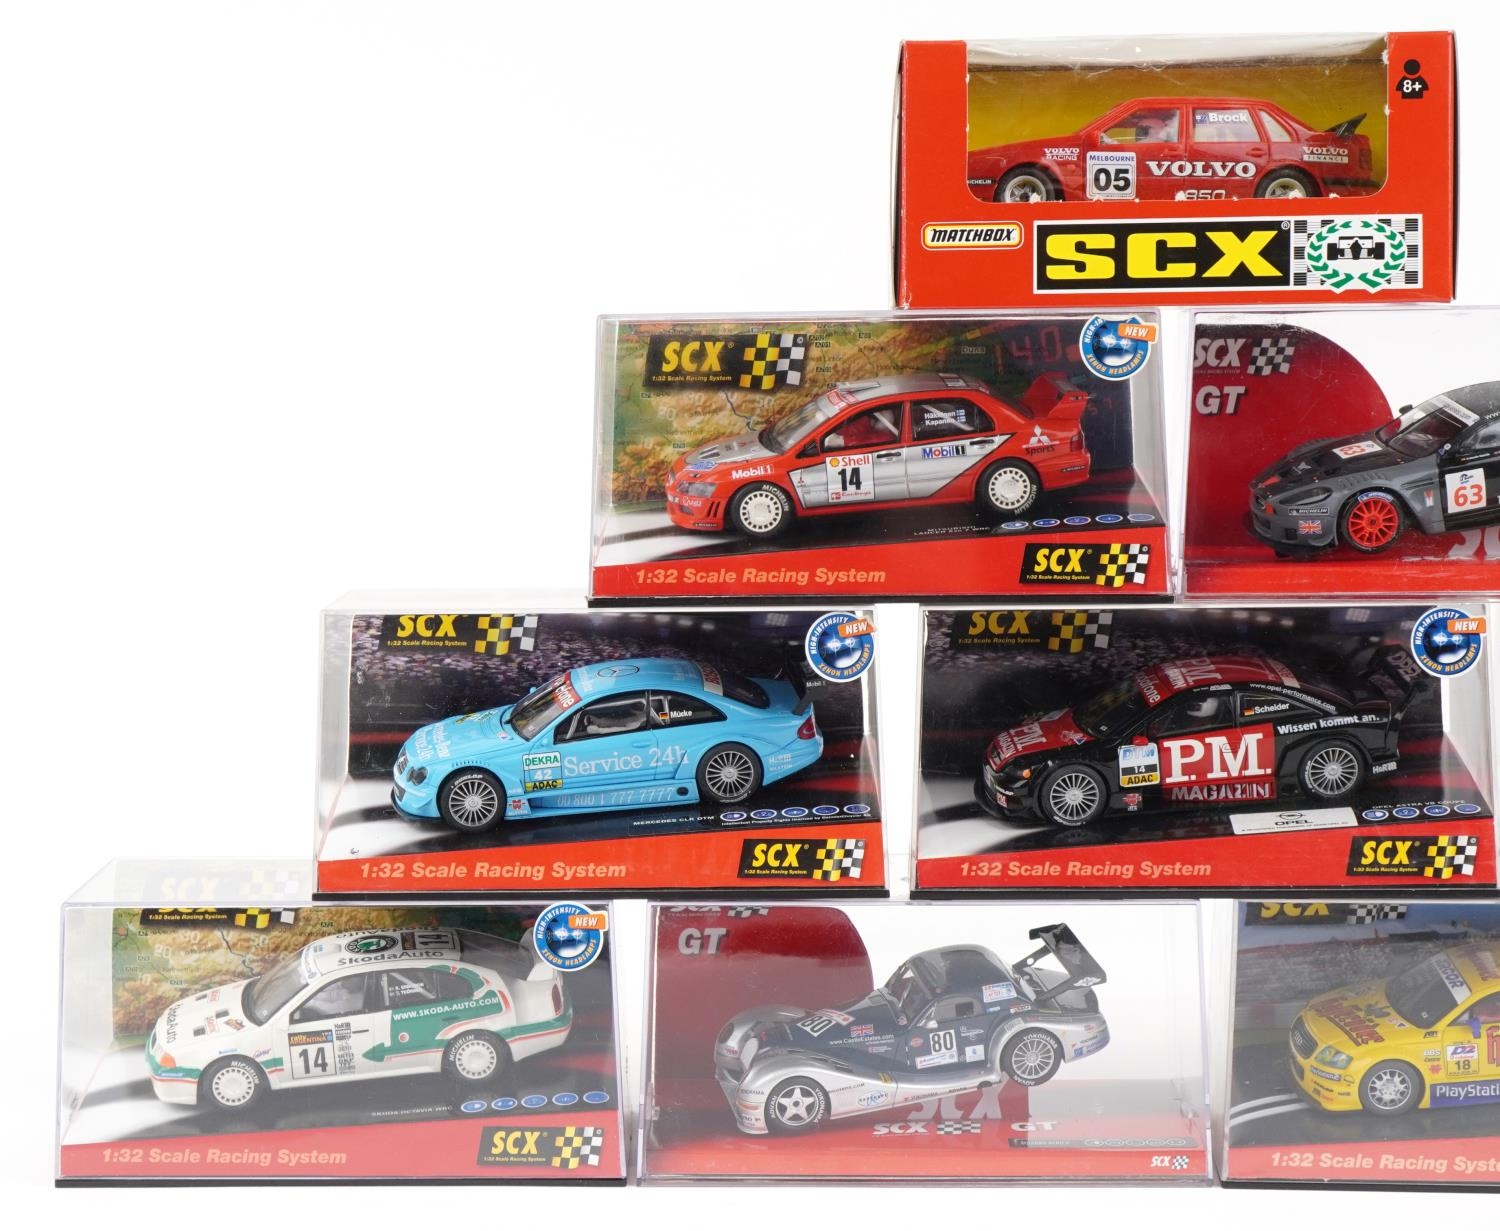 Ten Matchbox SCX 1:32 scale model slot cars with cases including Skoda Octavia WRC, Opel Astra V8 - Image 2 of 3